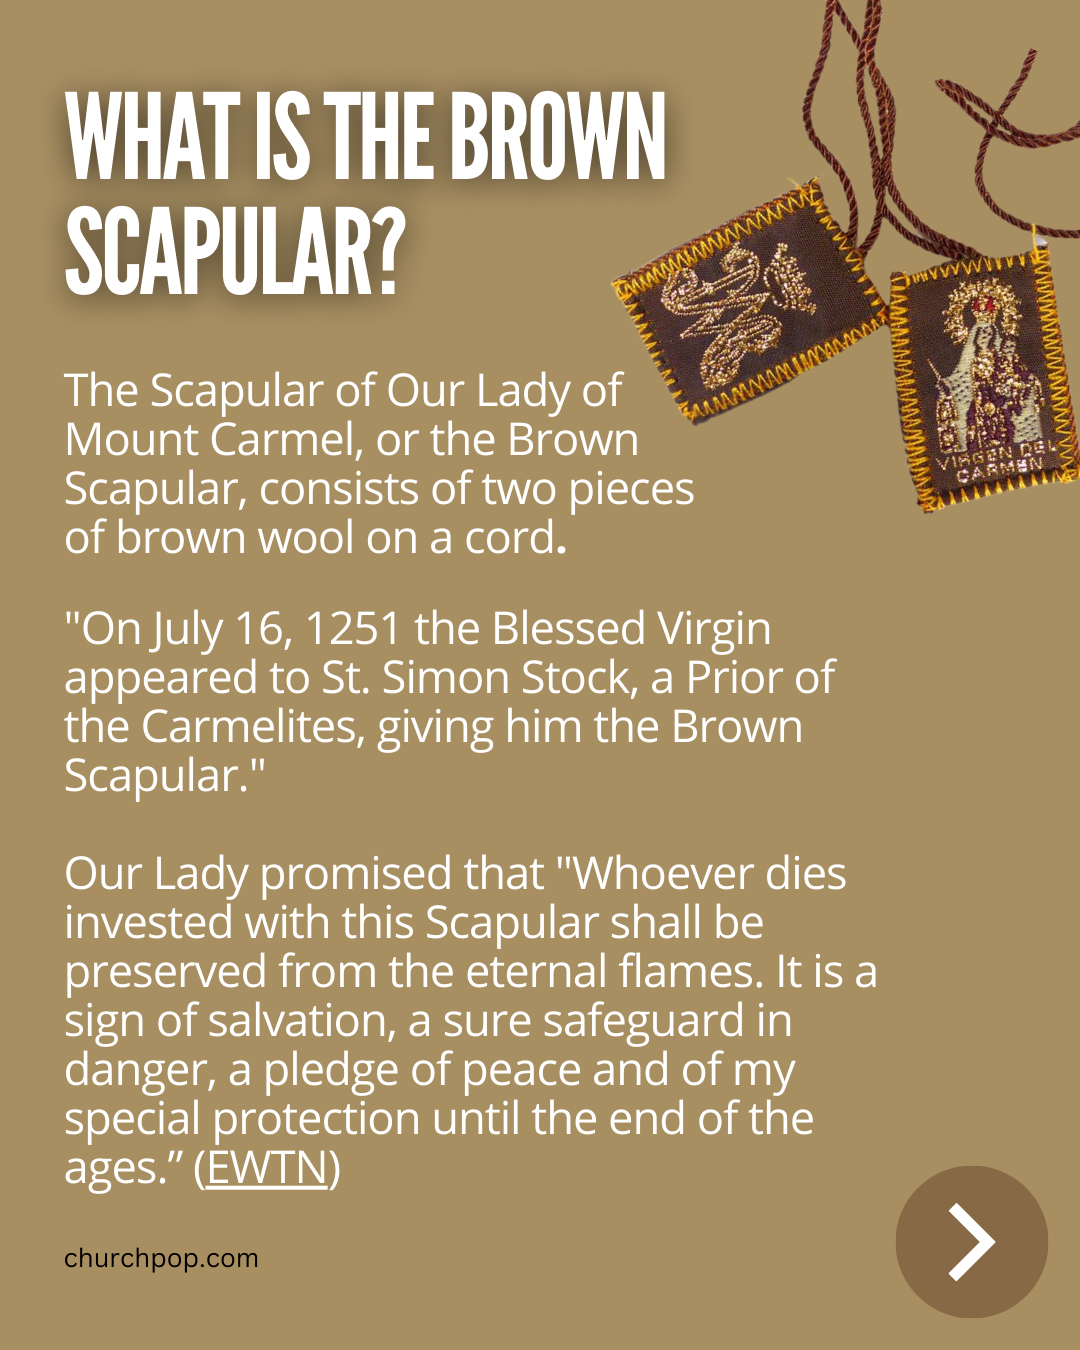 What is the brown scapular?